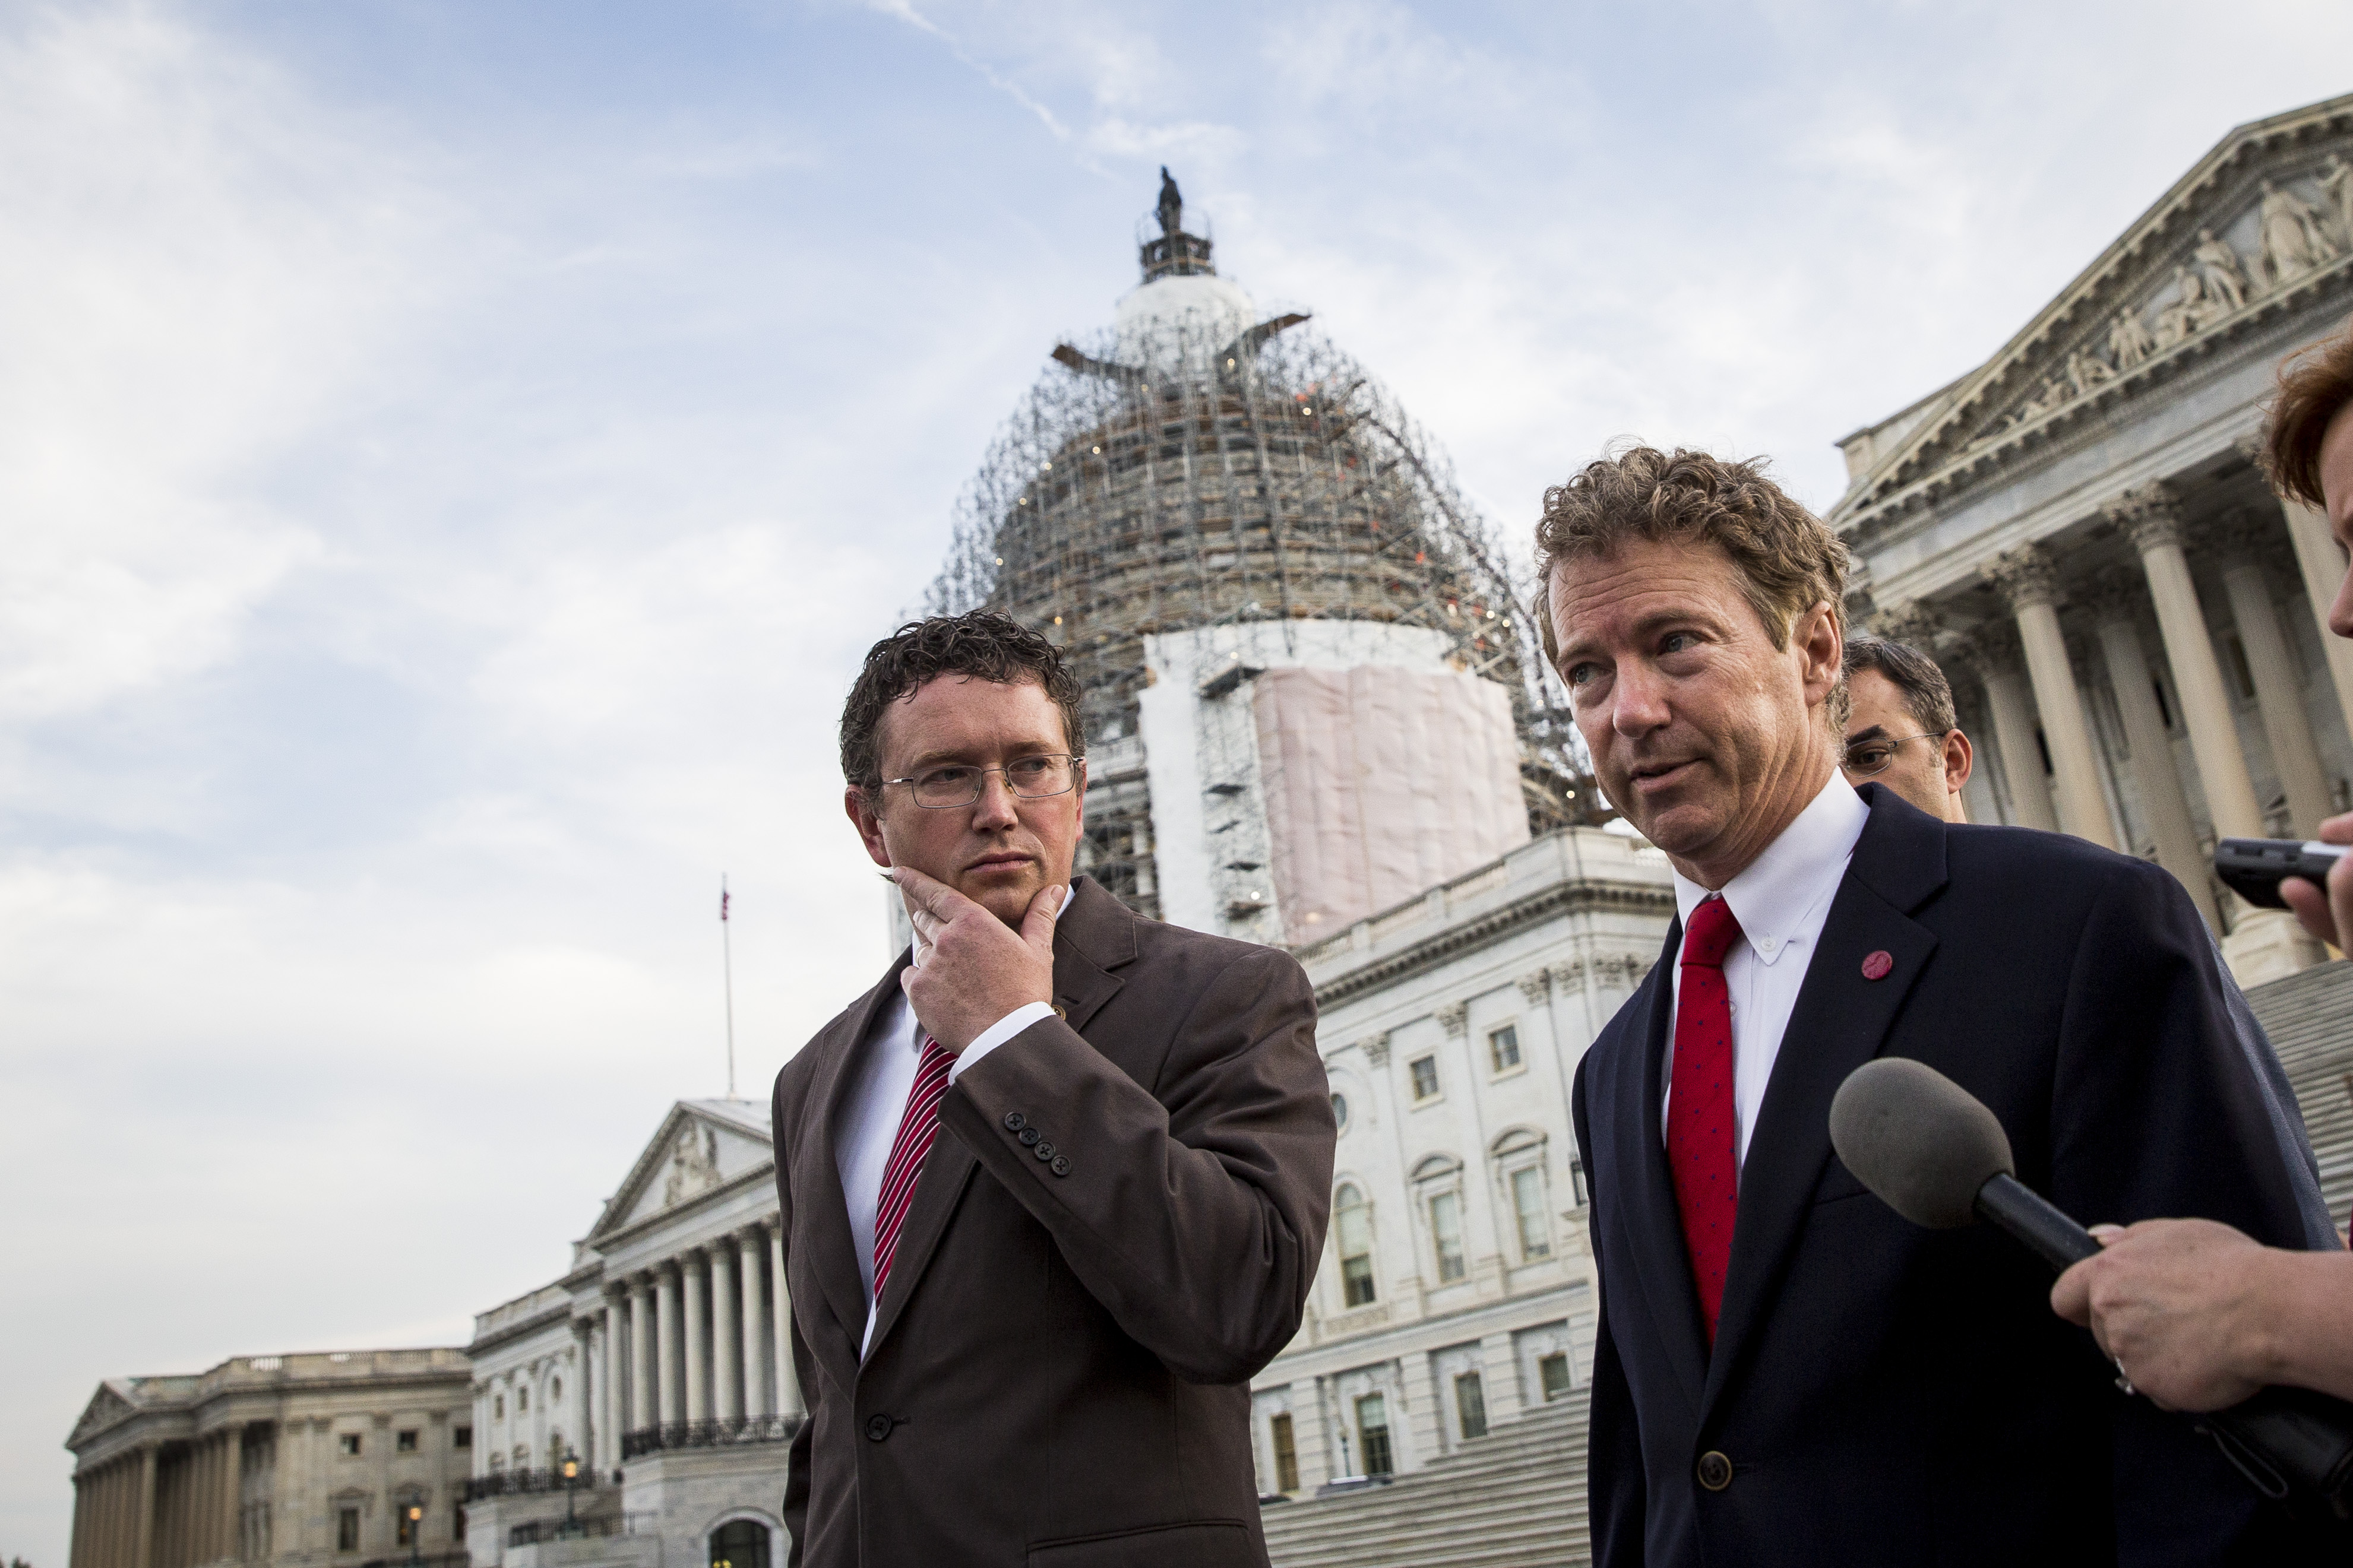 Rep. Thomas Massie listens as Sen. Rand Paul speaks to reporters after exiting the Senate chamber, on Capitol Hill, (Drew Angerer/Getty Images)